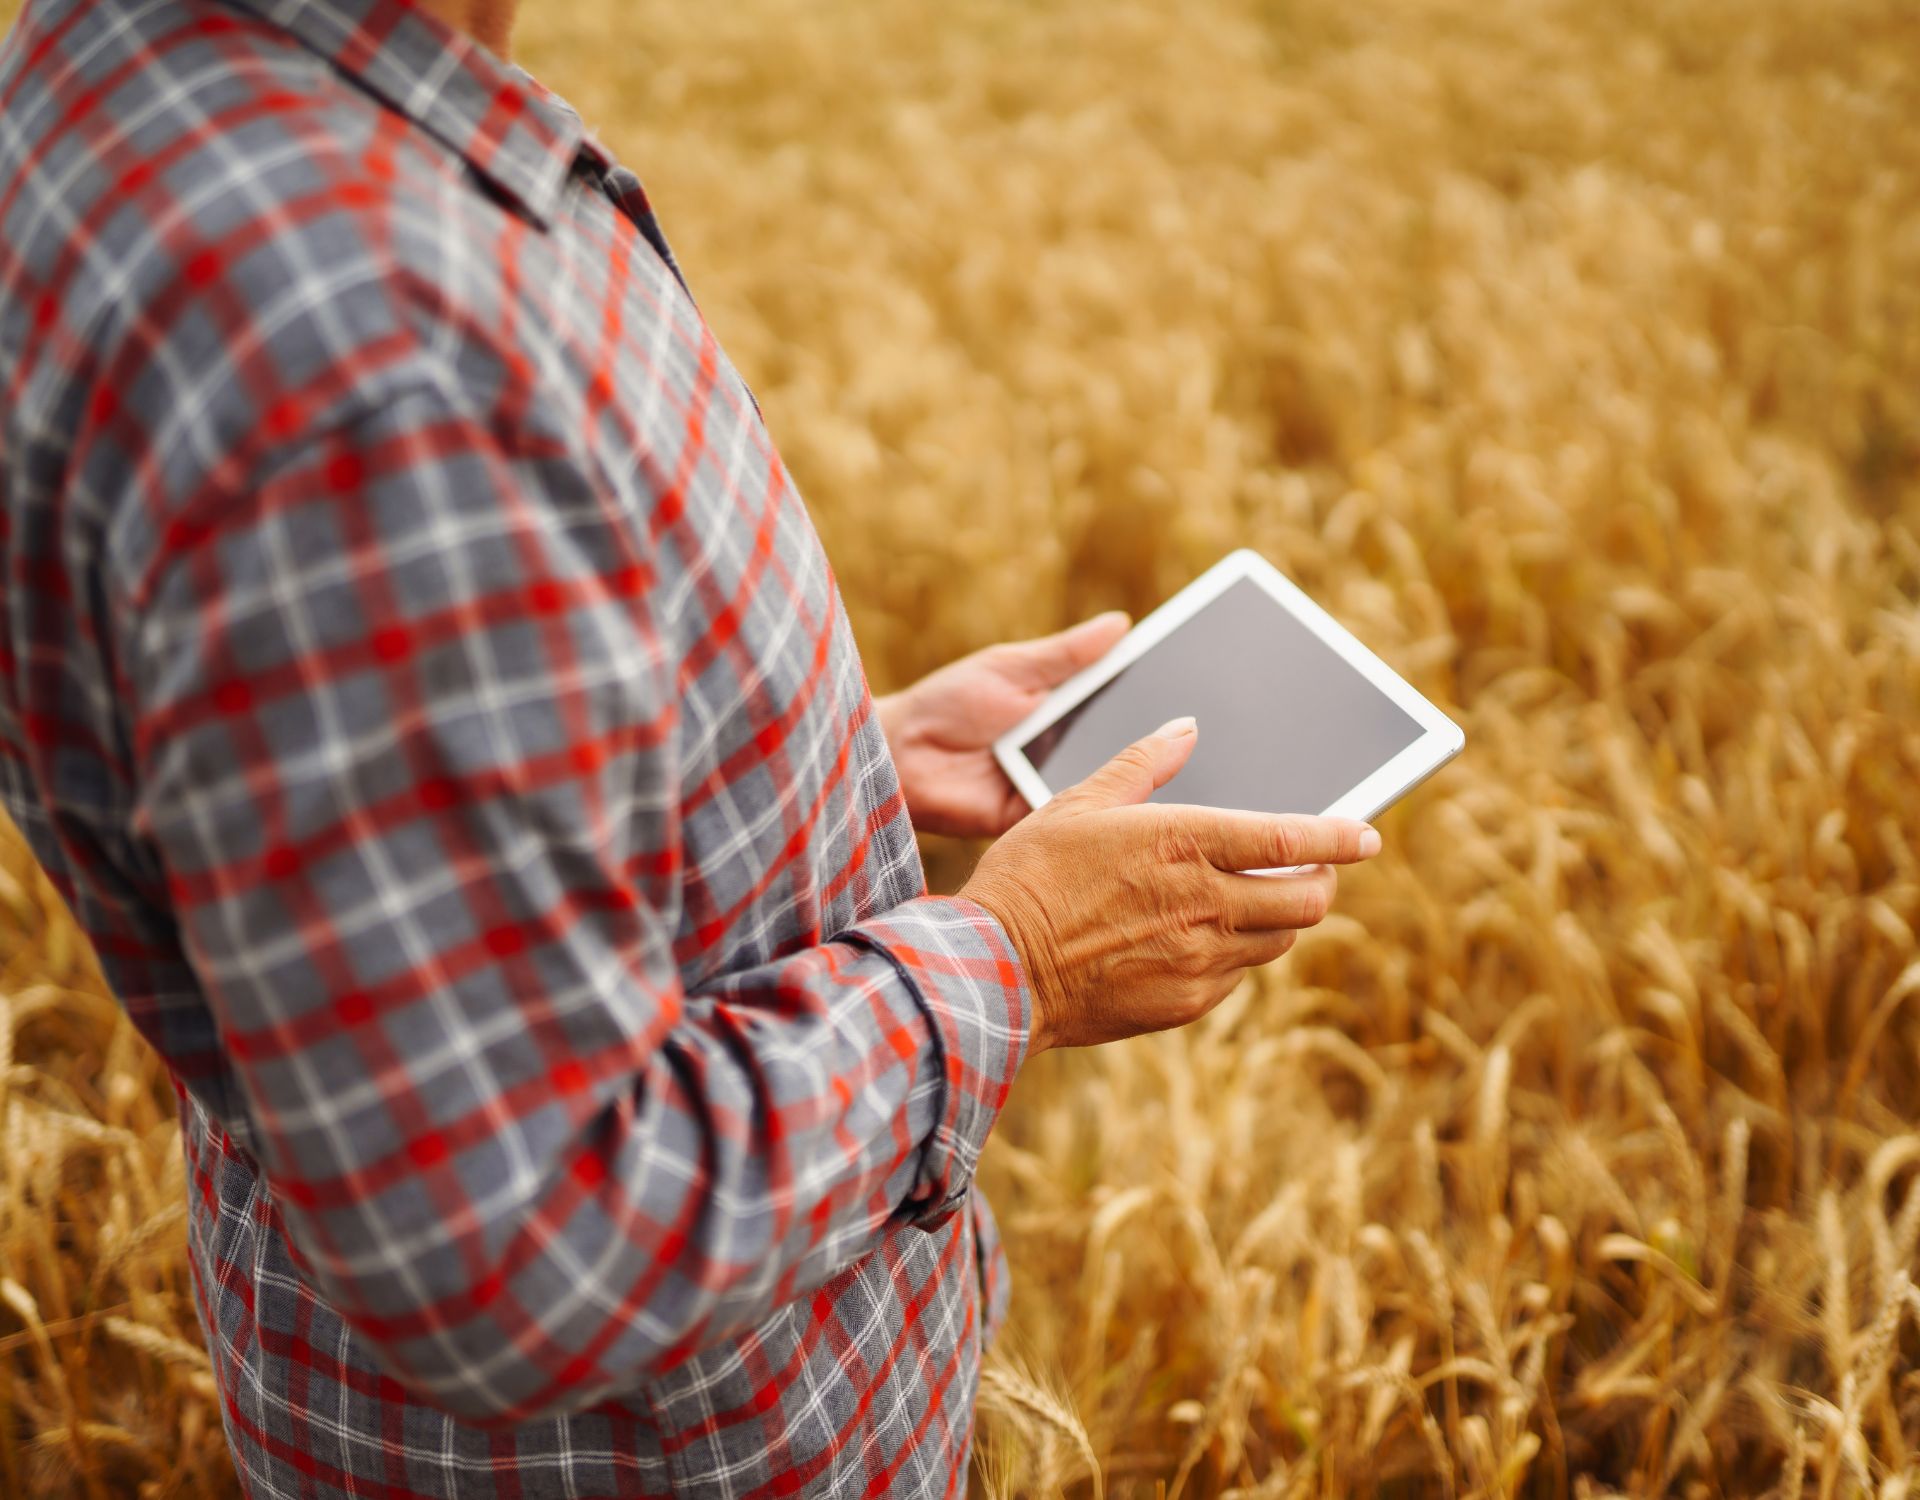 The Digital Revolution in Agriculture